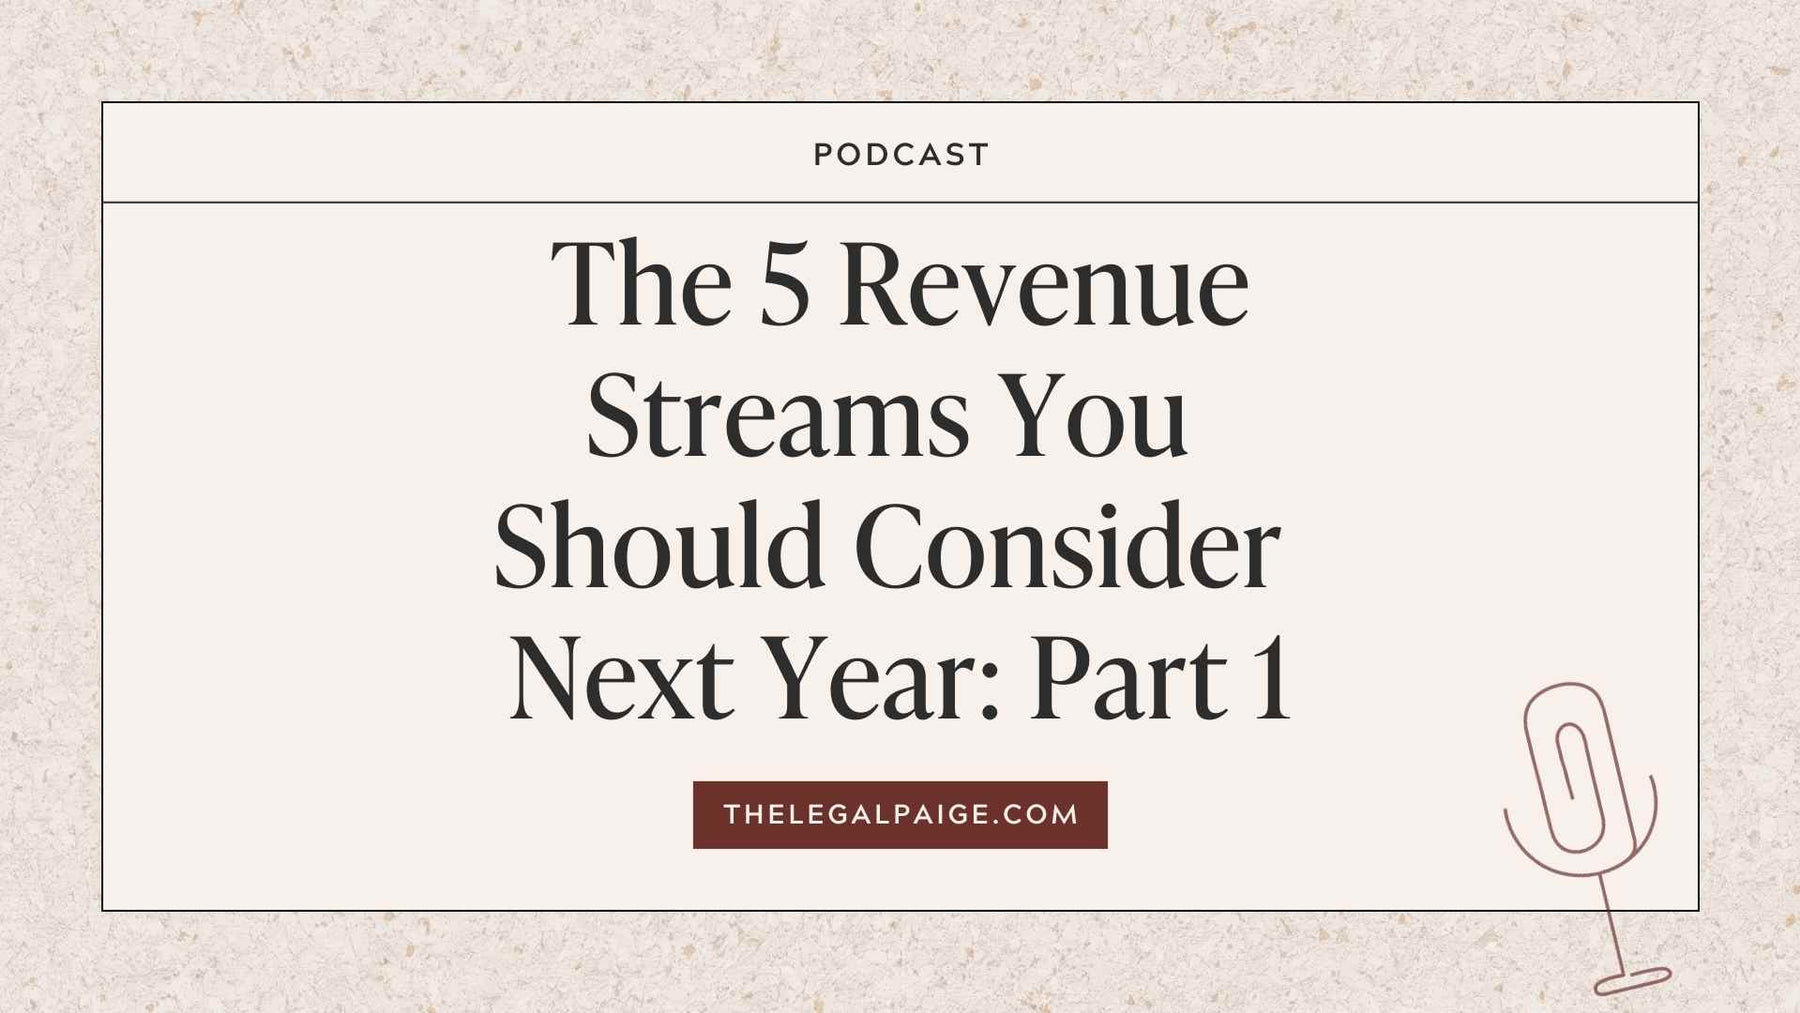 The Legal Paige Podcast - Episode 143 - The 5 Revenue Streams You Should Consider Next Year - Part 1